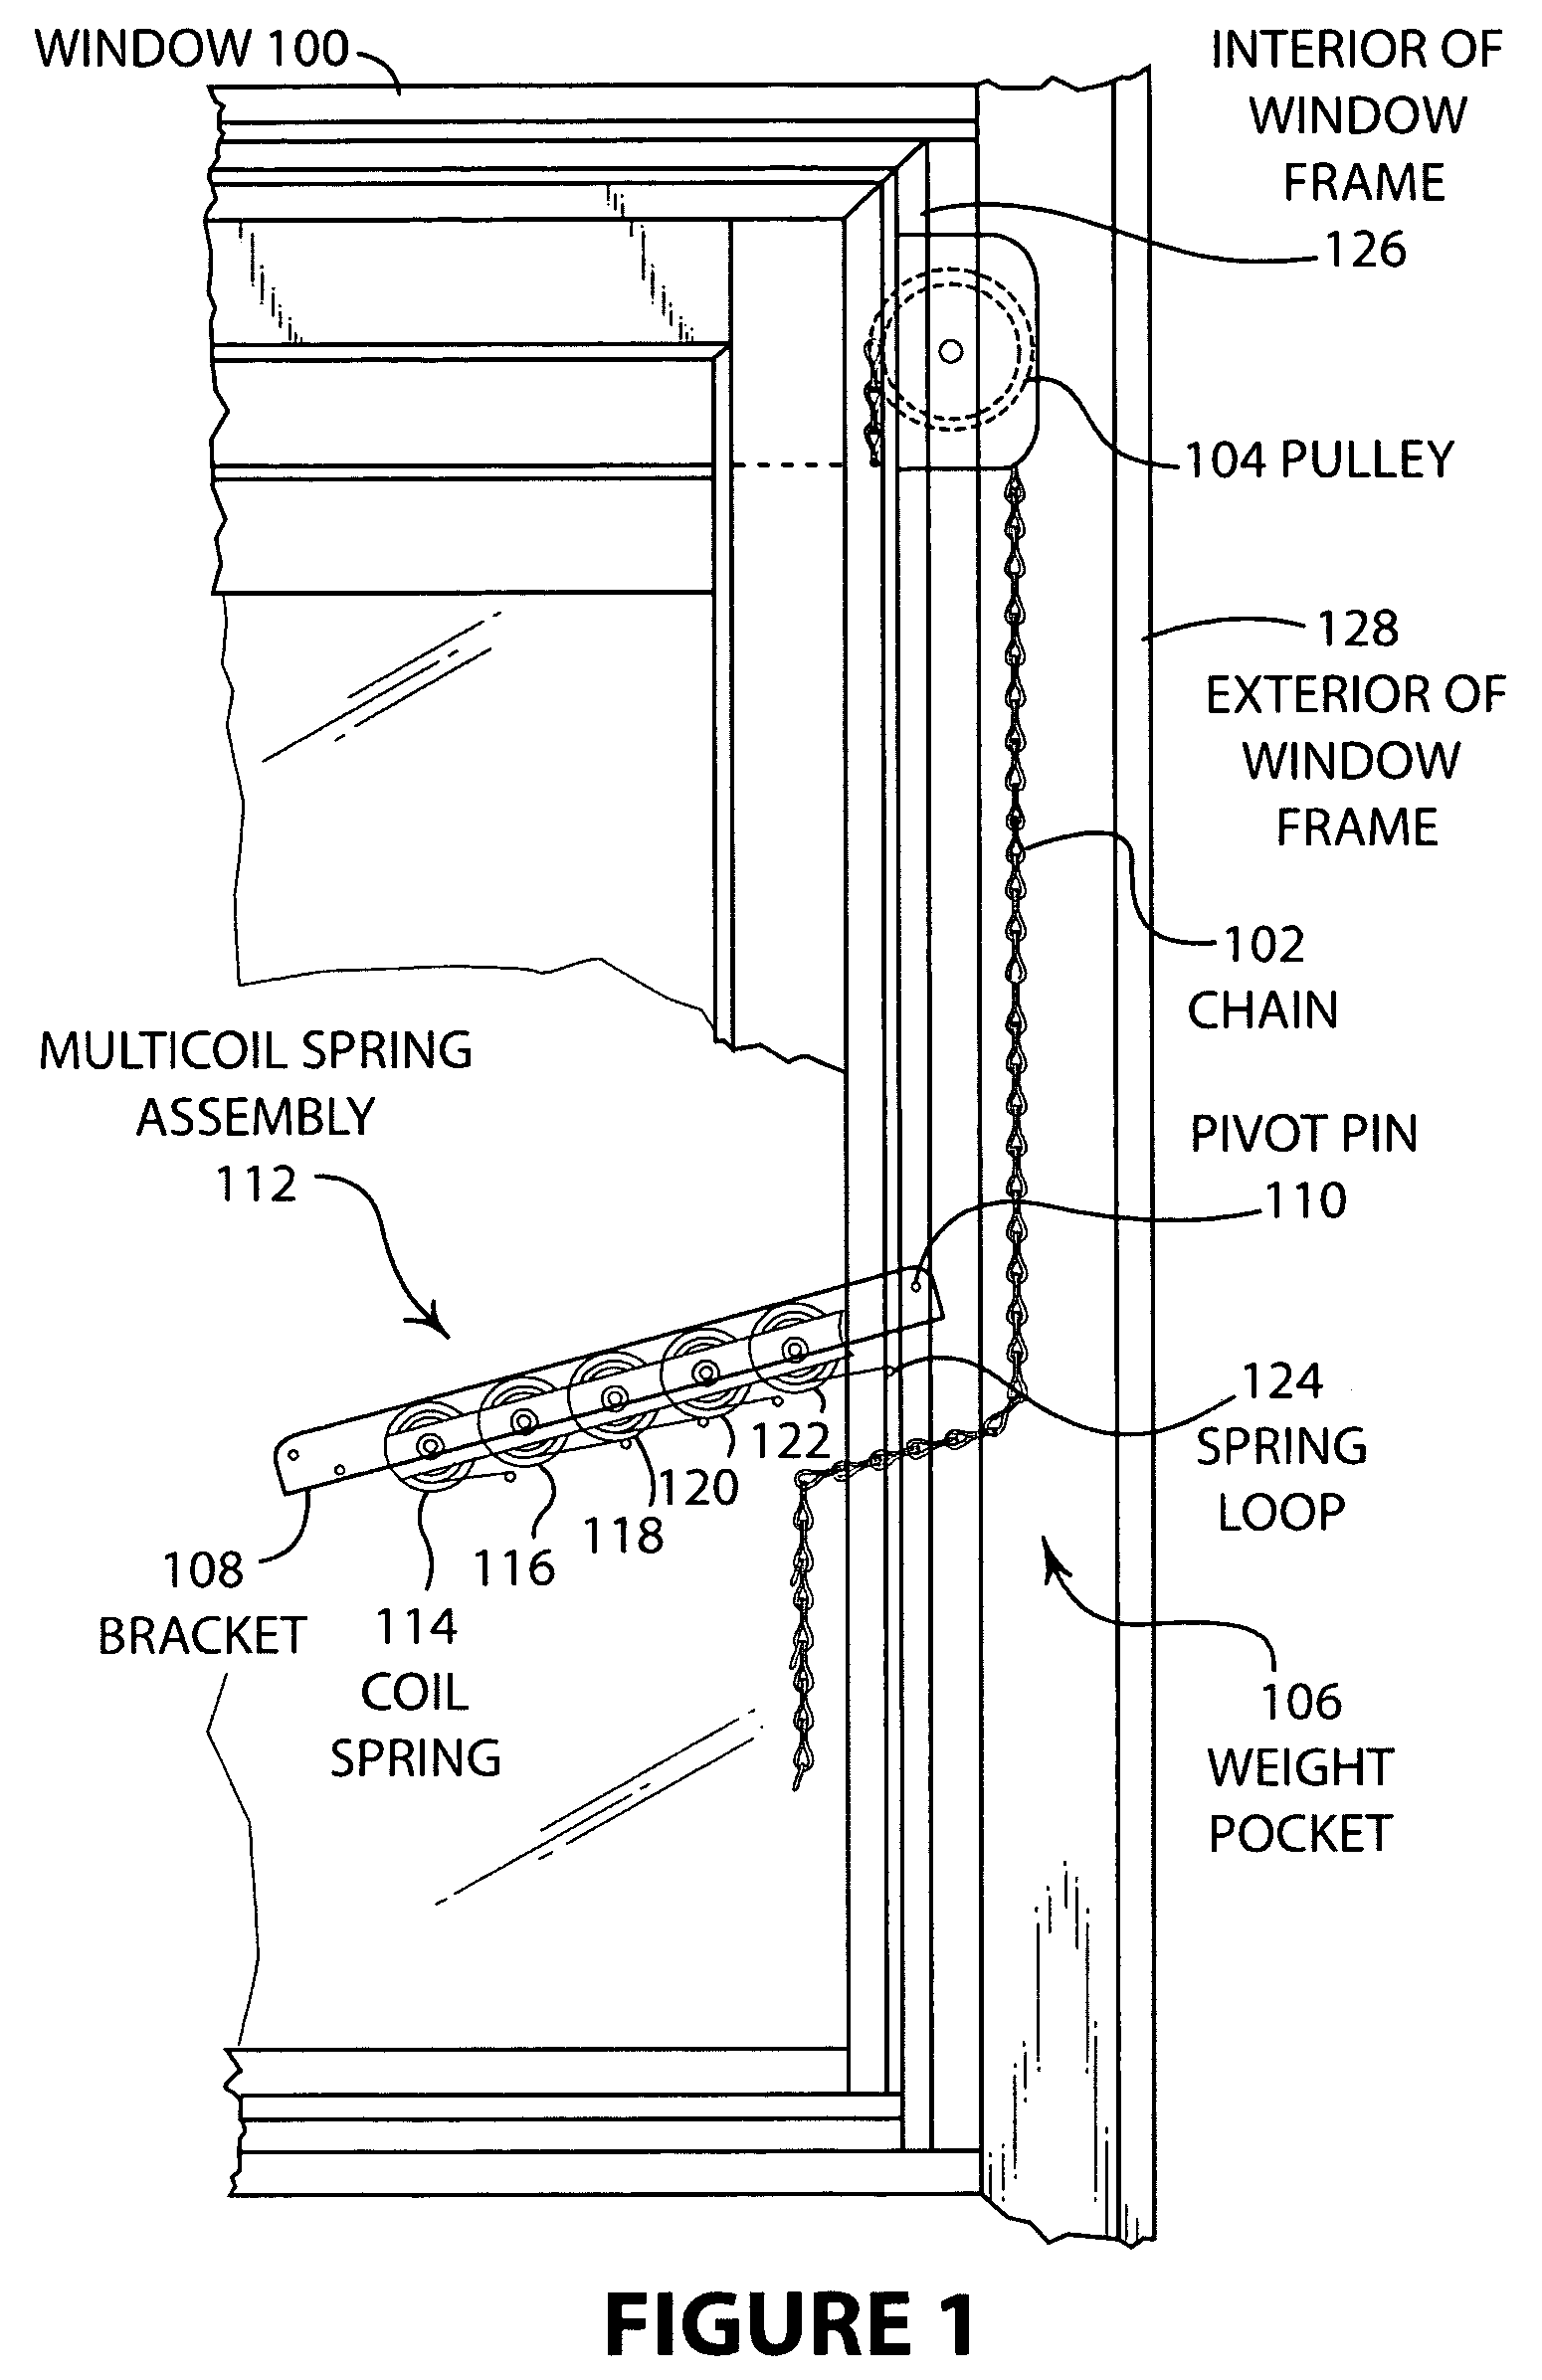 Multi-coil spring window counterbalance assembly